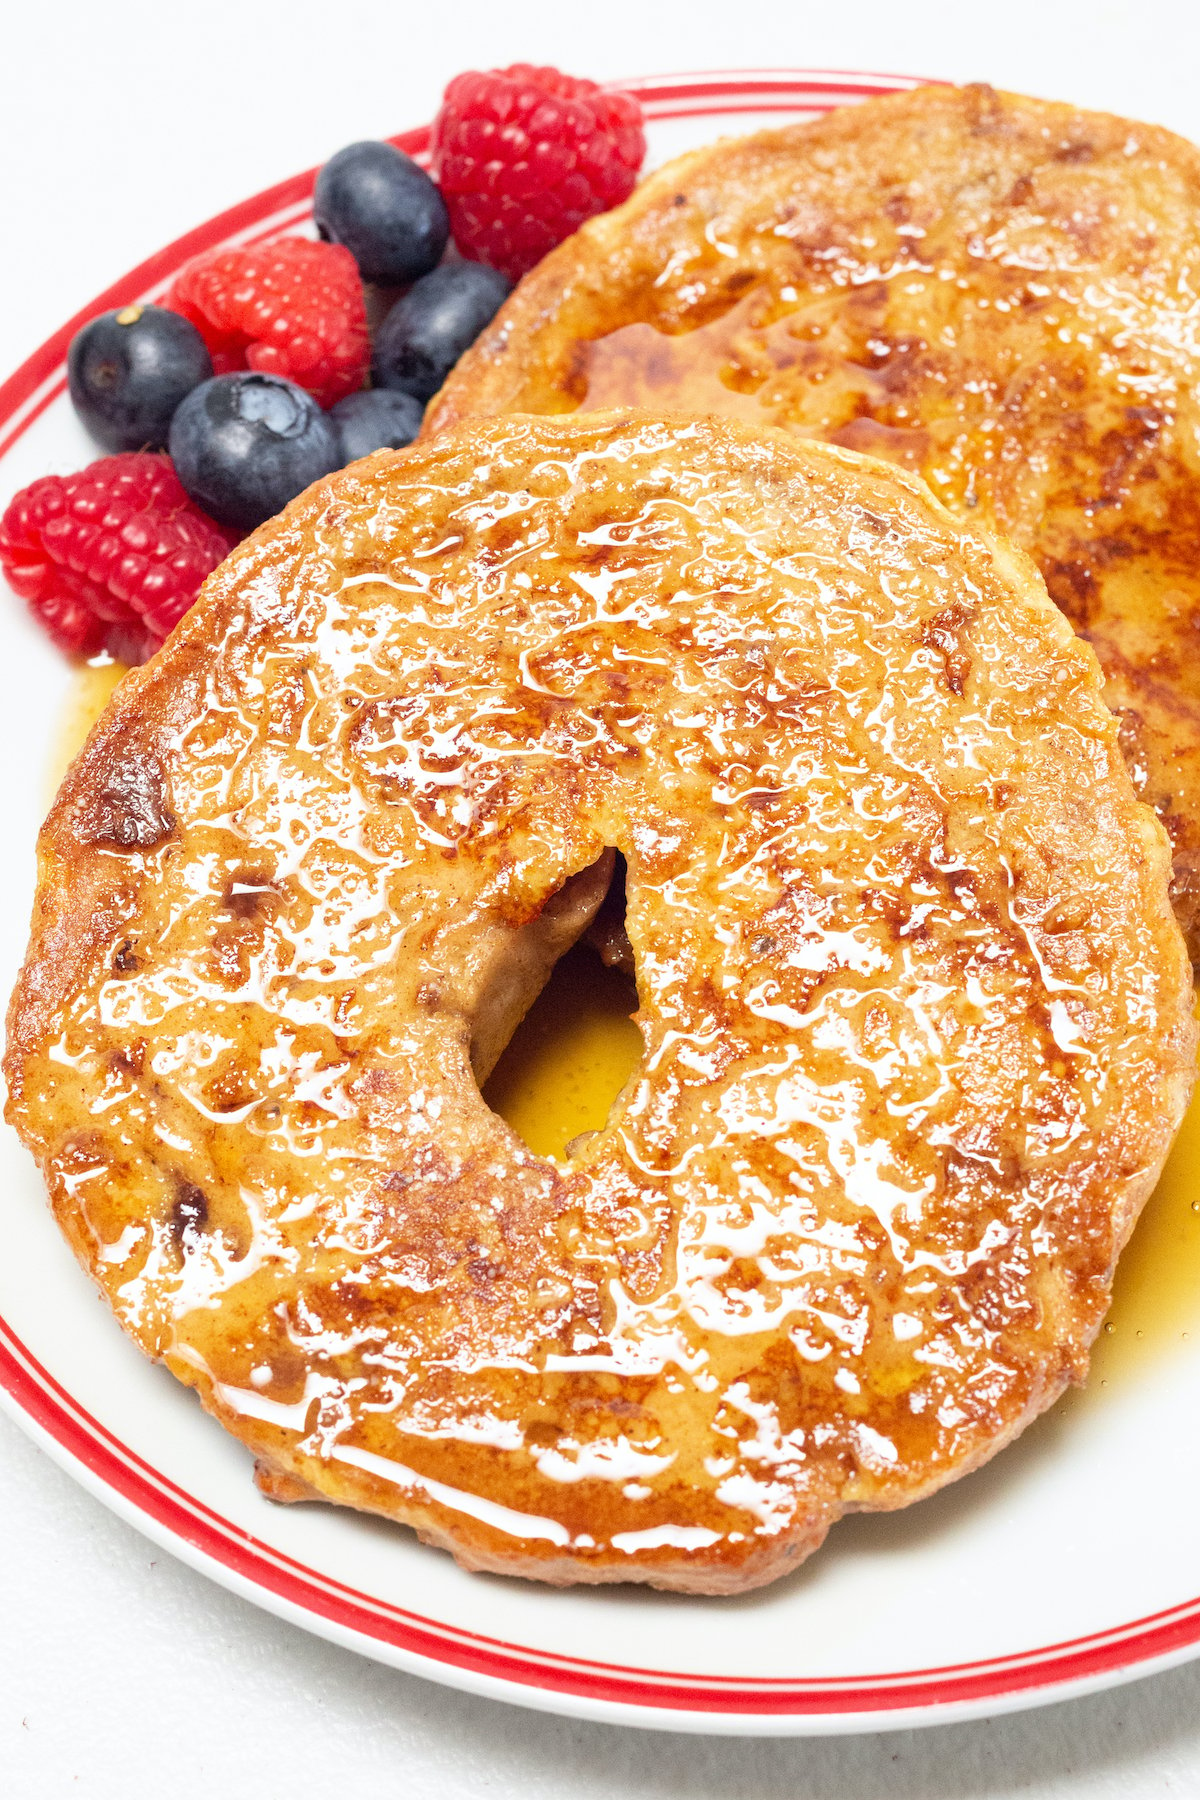 A sliced bagel that has been turned into french toast sits on a plate next to fresh berries.